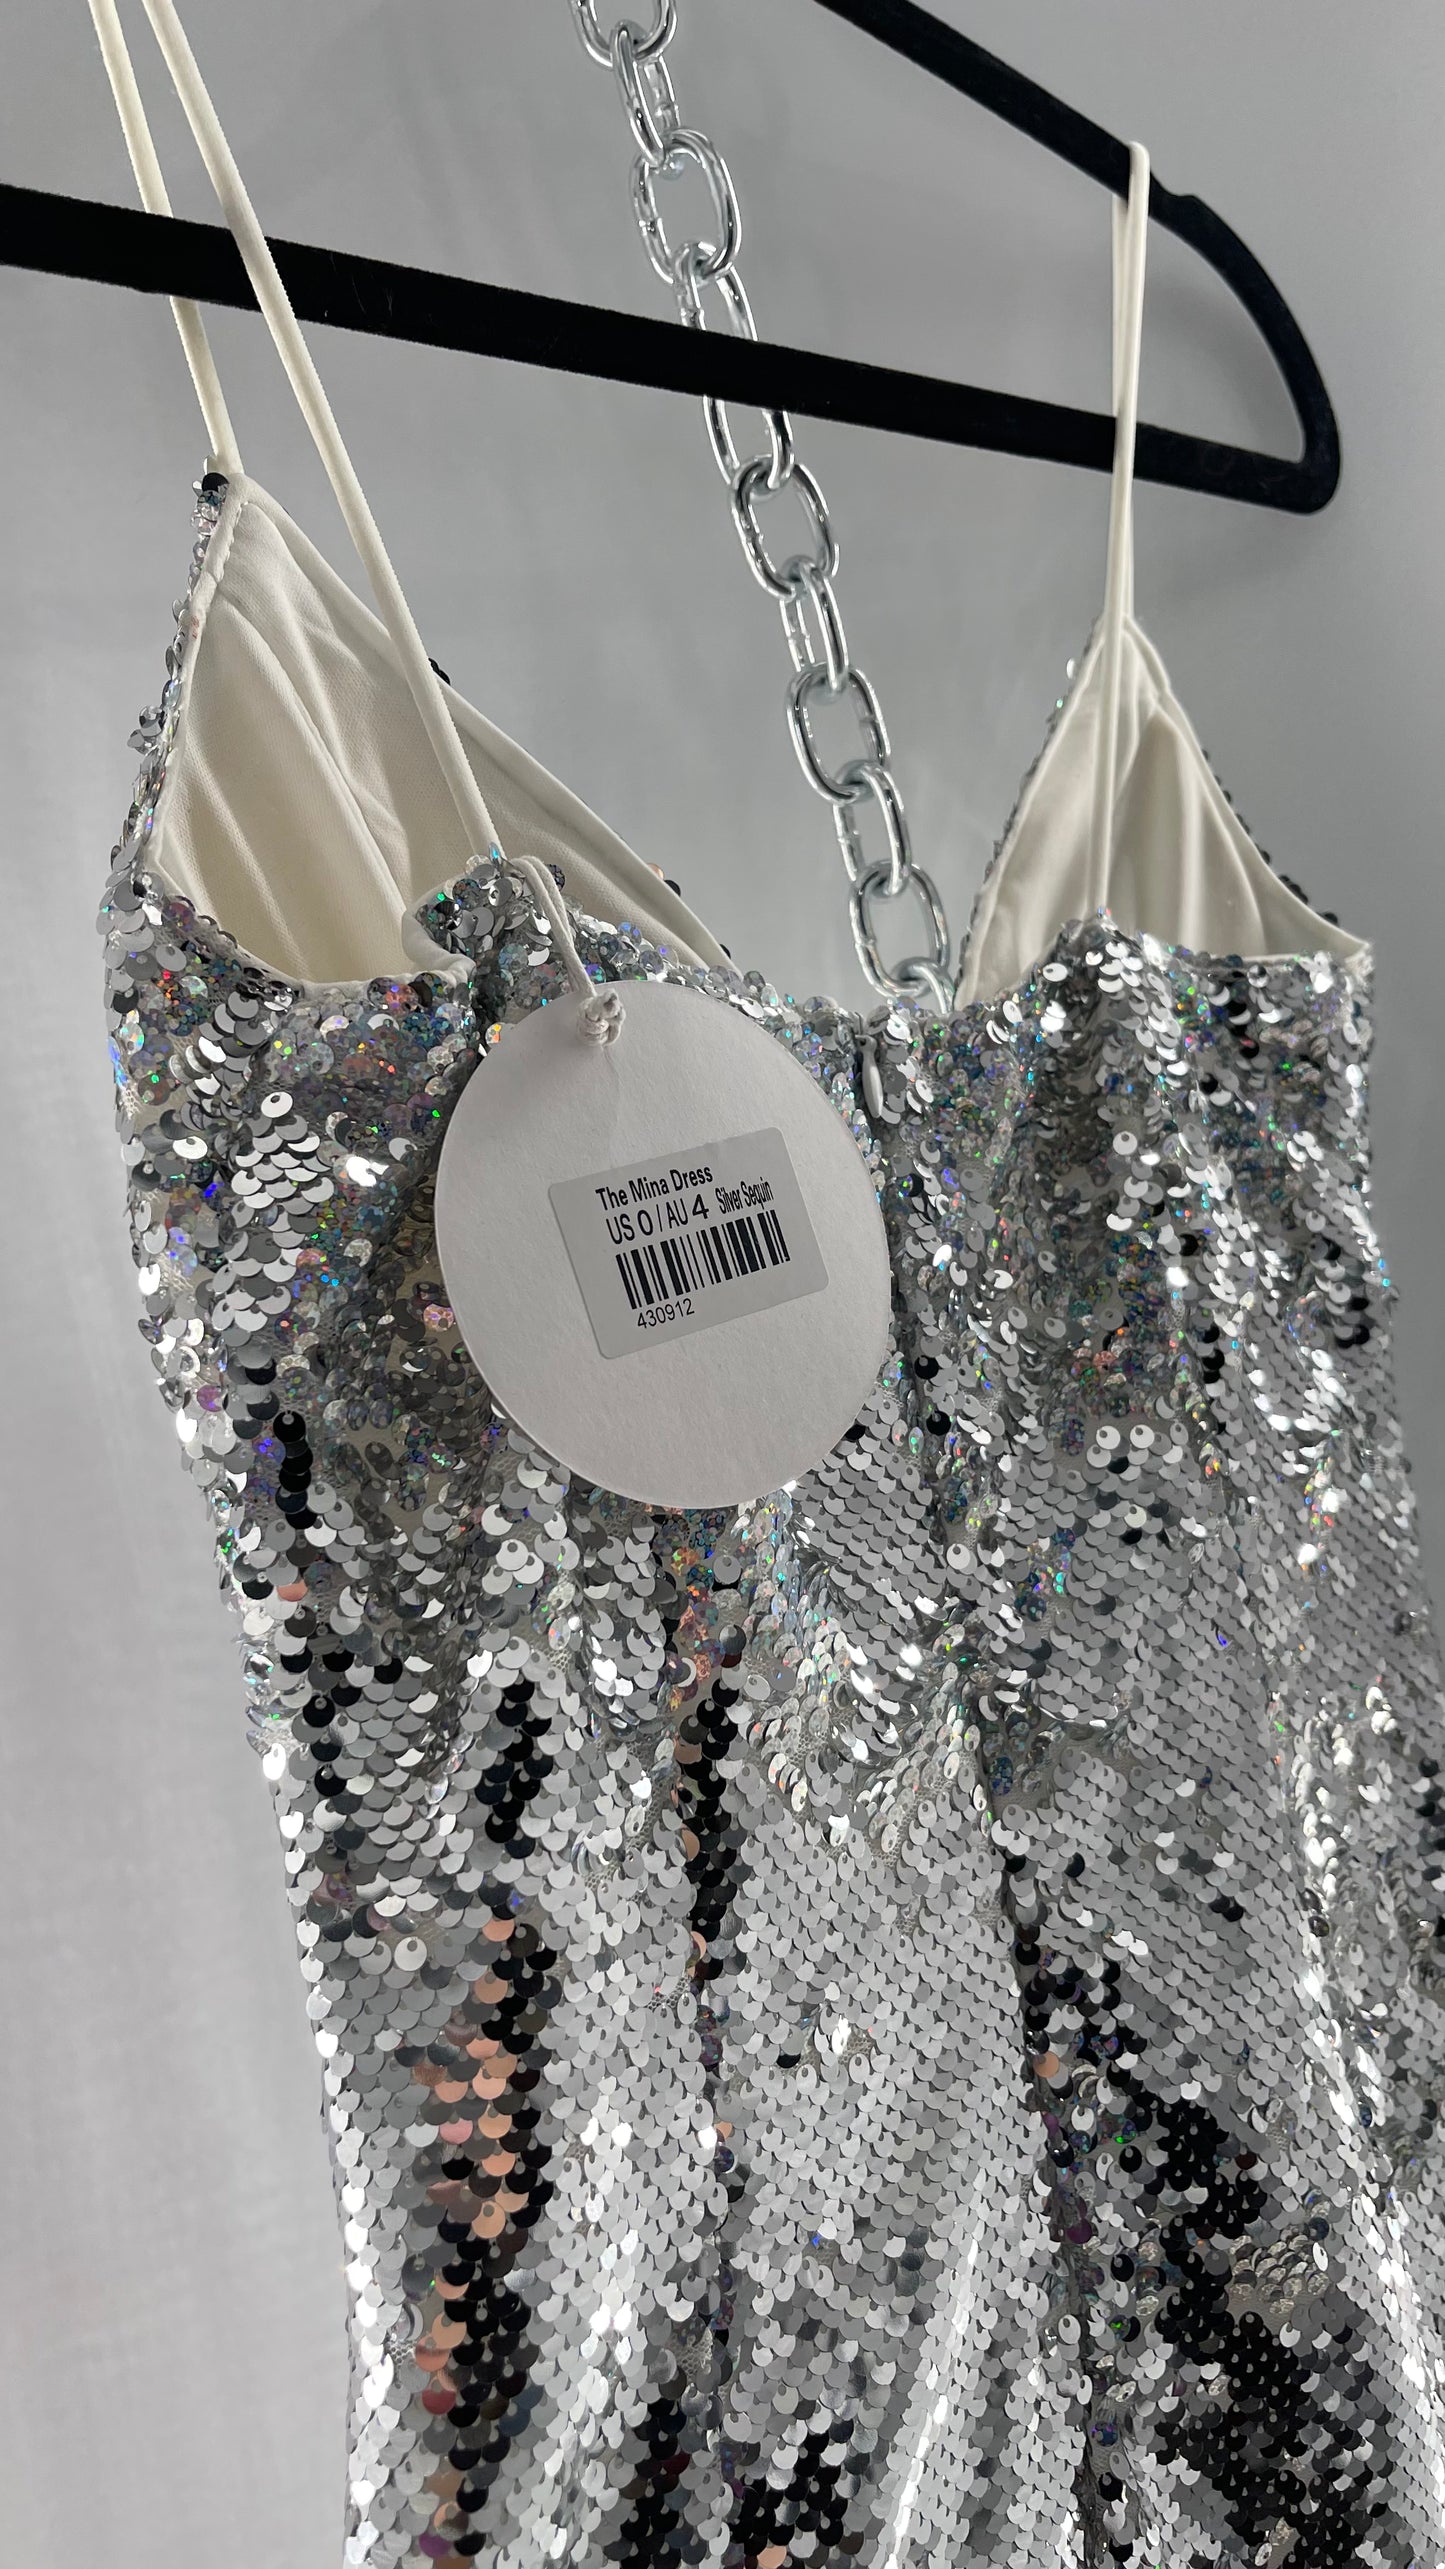 Princess Polly Silver Iridescent Sequin Mini Dress with Triangle Cups and Thigh Slit (0)